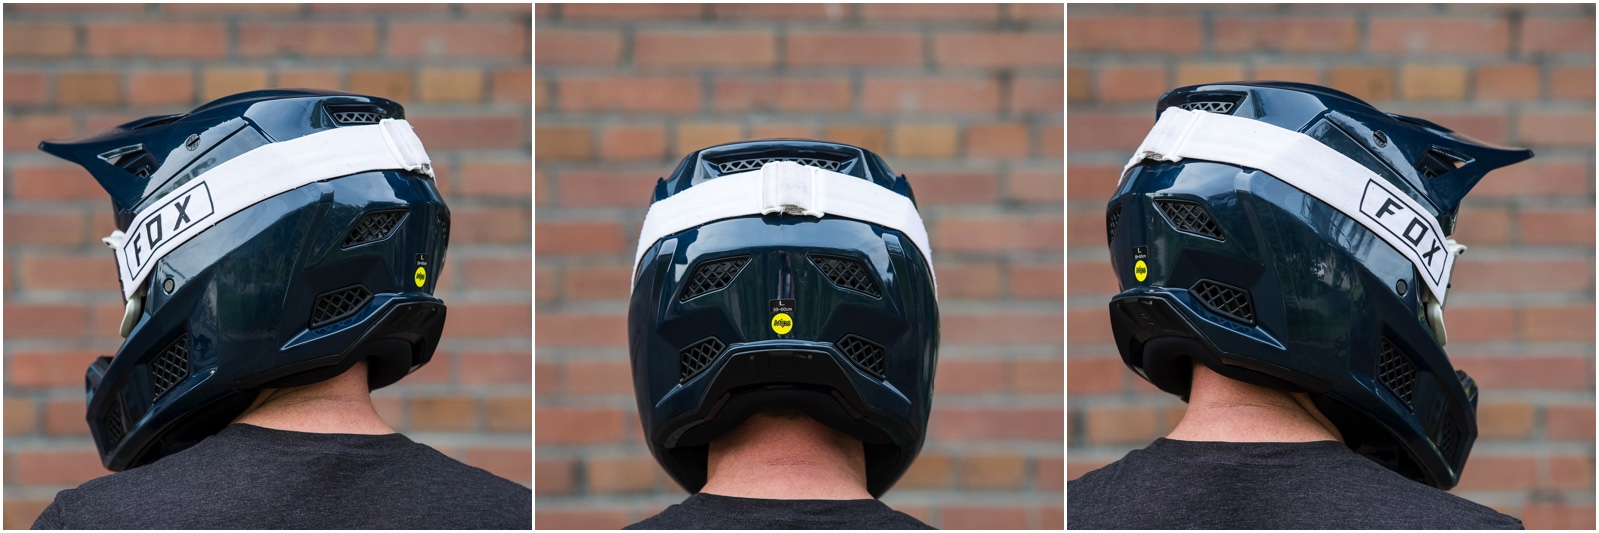 FOX RAMPAGE PRO CARBON MIPS HELMET REVIEW - BIKE PARK TO RED BULL